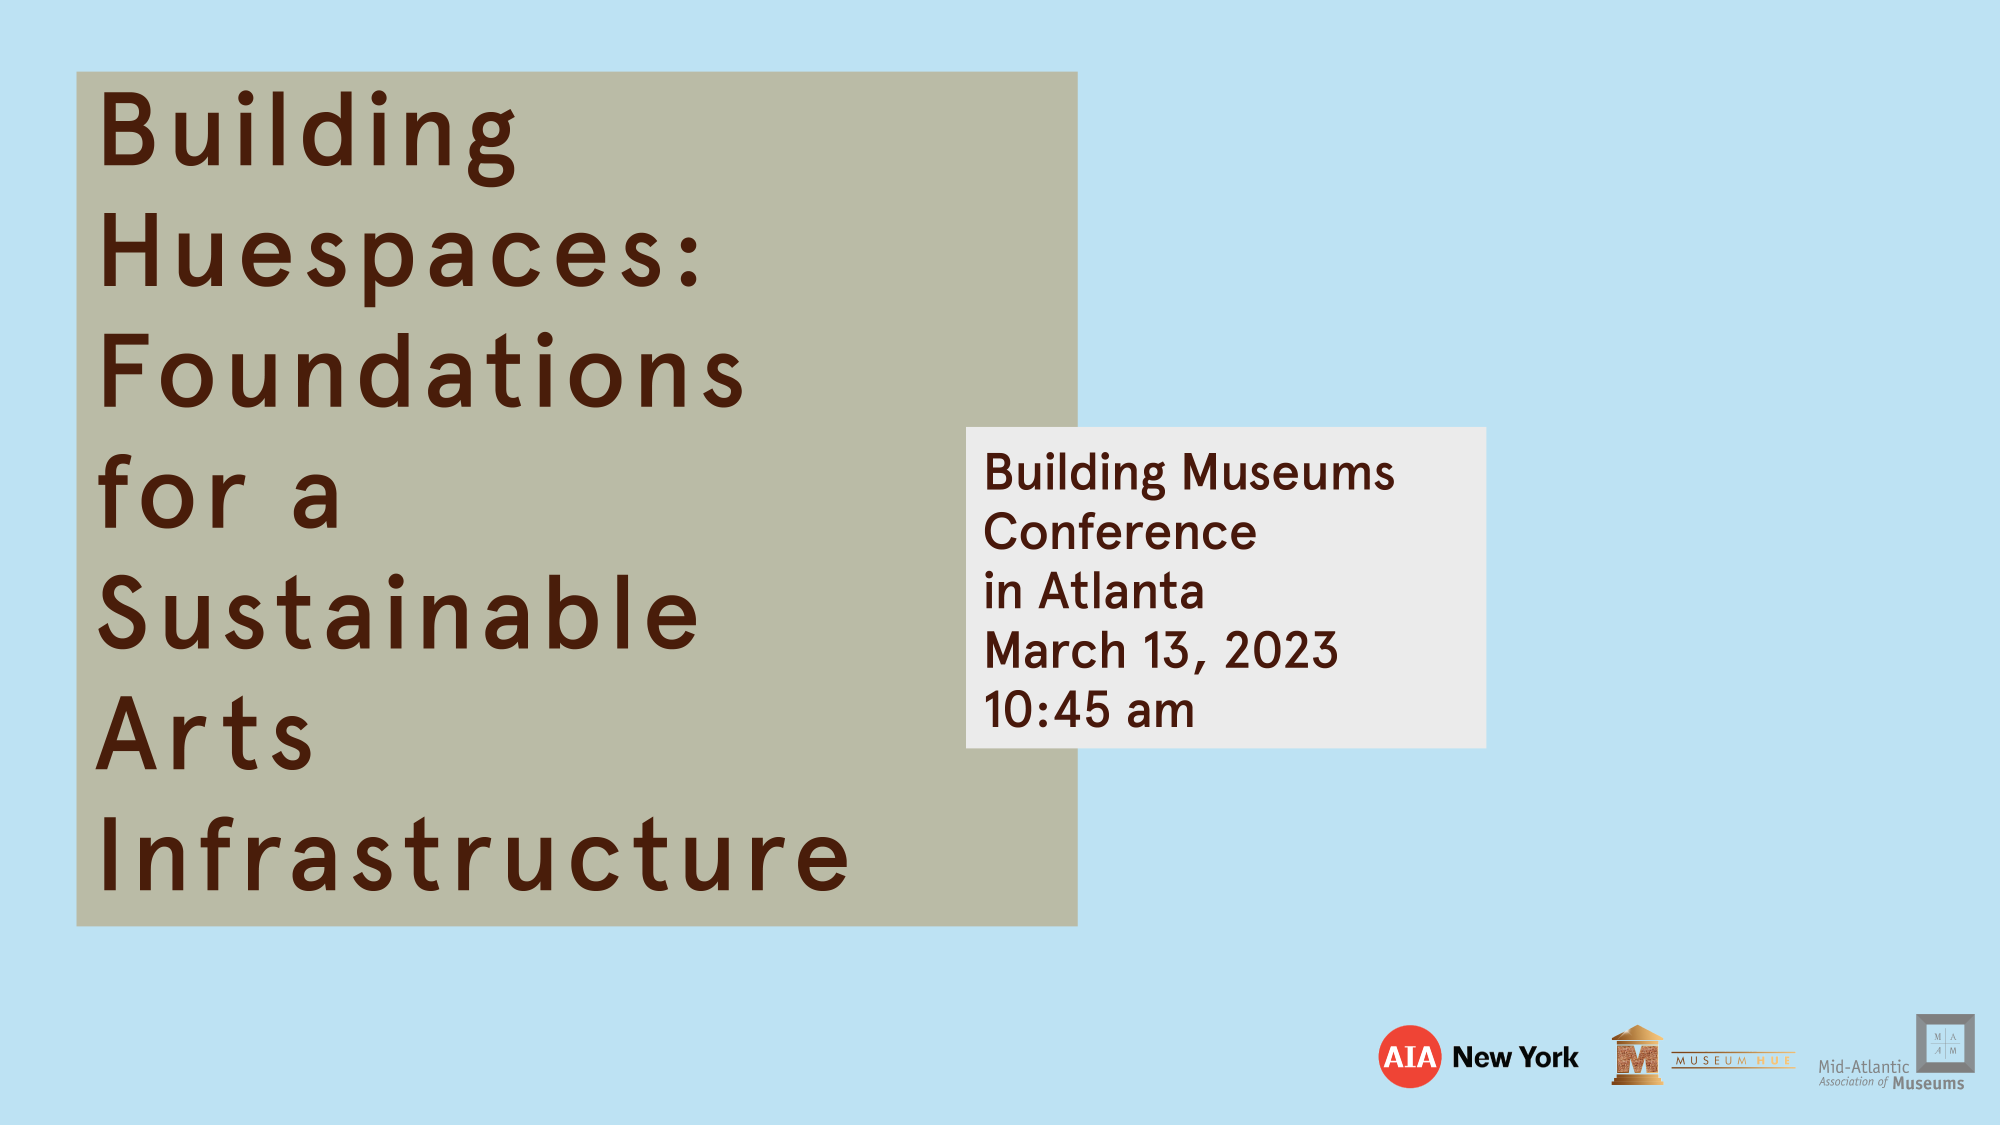 Building HueSpaces: Foundations for a Sustainable Arts Infrastructure will be held in Atlanta, Georgia on March 13, 2023, as part of [Mid-Atlanta Association of Museum's](http://midatlanticmuseums.org/) Building Museums Symposium.